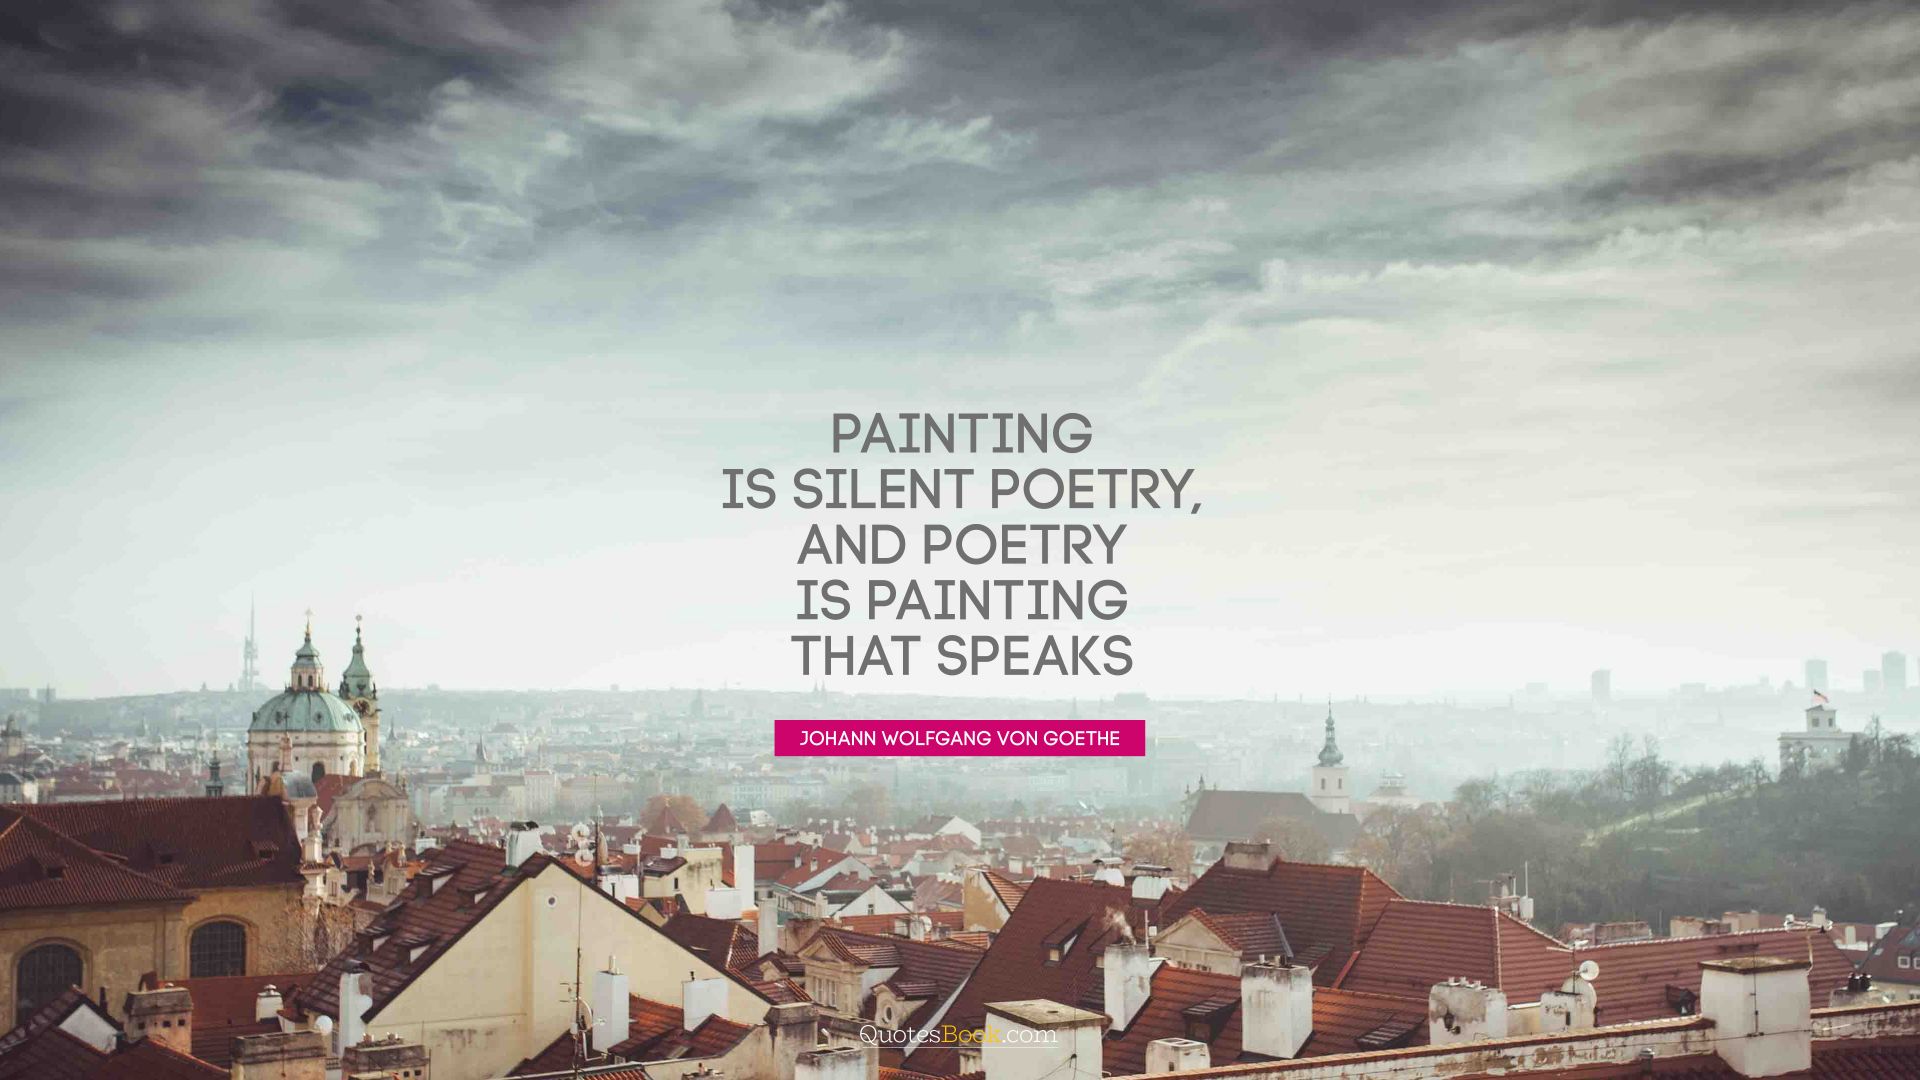 Painting is silent poetry, and poetry is painting that speaks. - Quote by Johann Wolfgang von Goethe